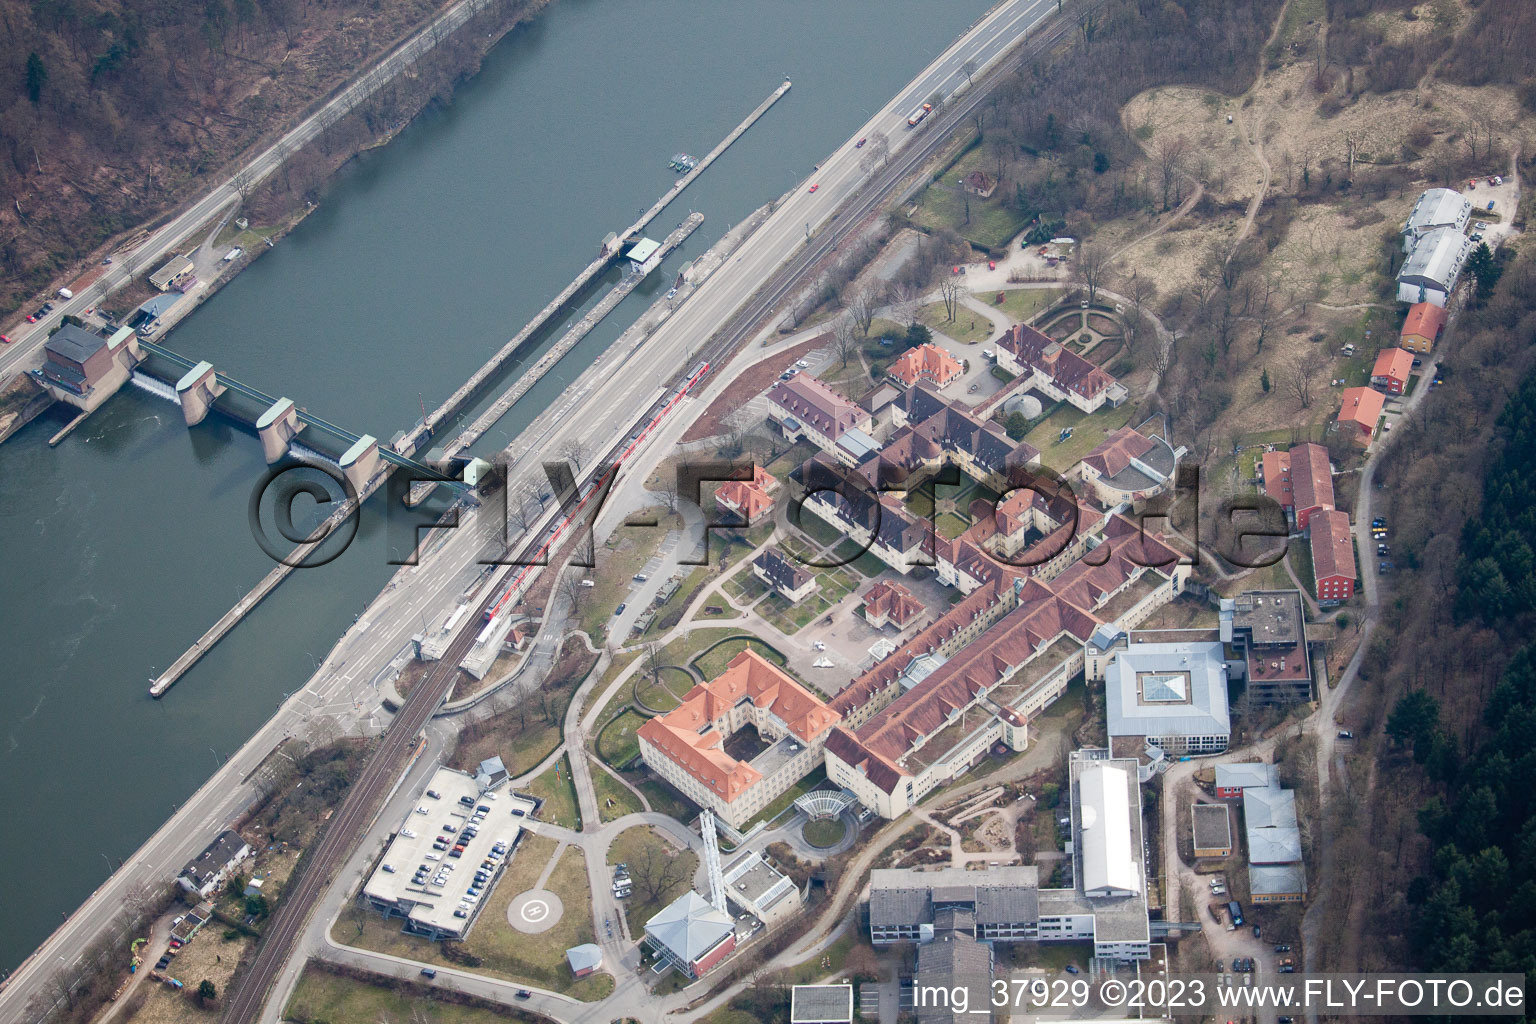 Aerial view of Orthopedic clinic in the district Schlierbach in Heidelberg in the state Baden-Wuerttemberg, Germany